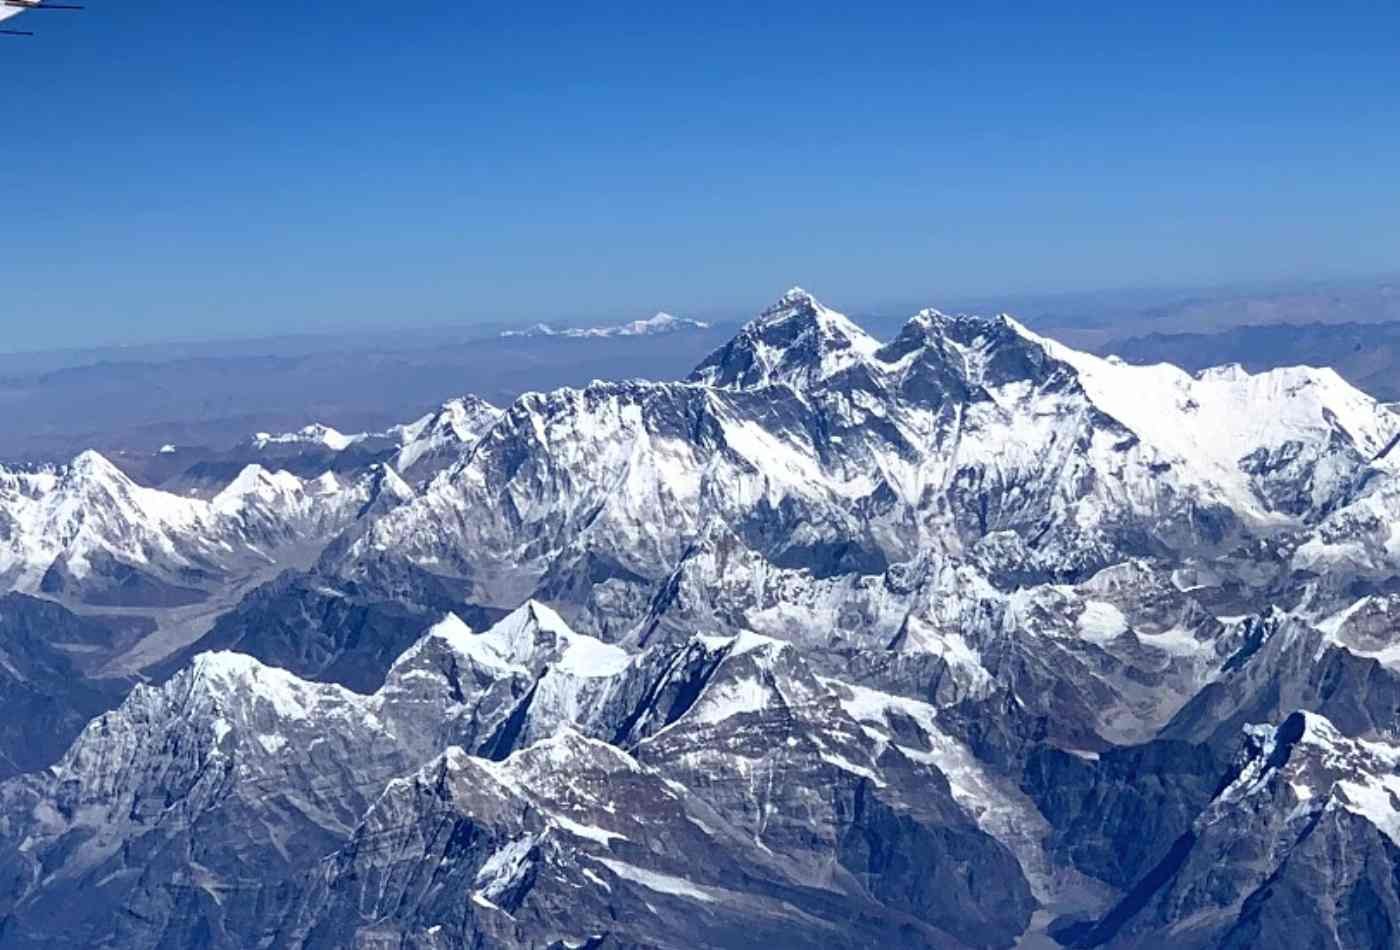 Aerial view of the majestic Himalayan mountain range, including Mt. Everest, and, Mt. Makalu, as seen from an airplane en route to Paro, Bhutan.